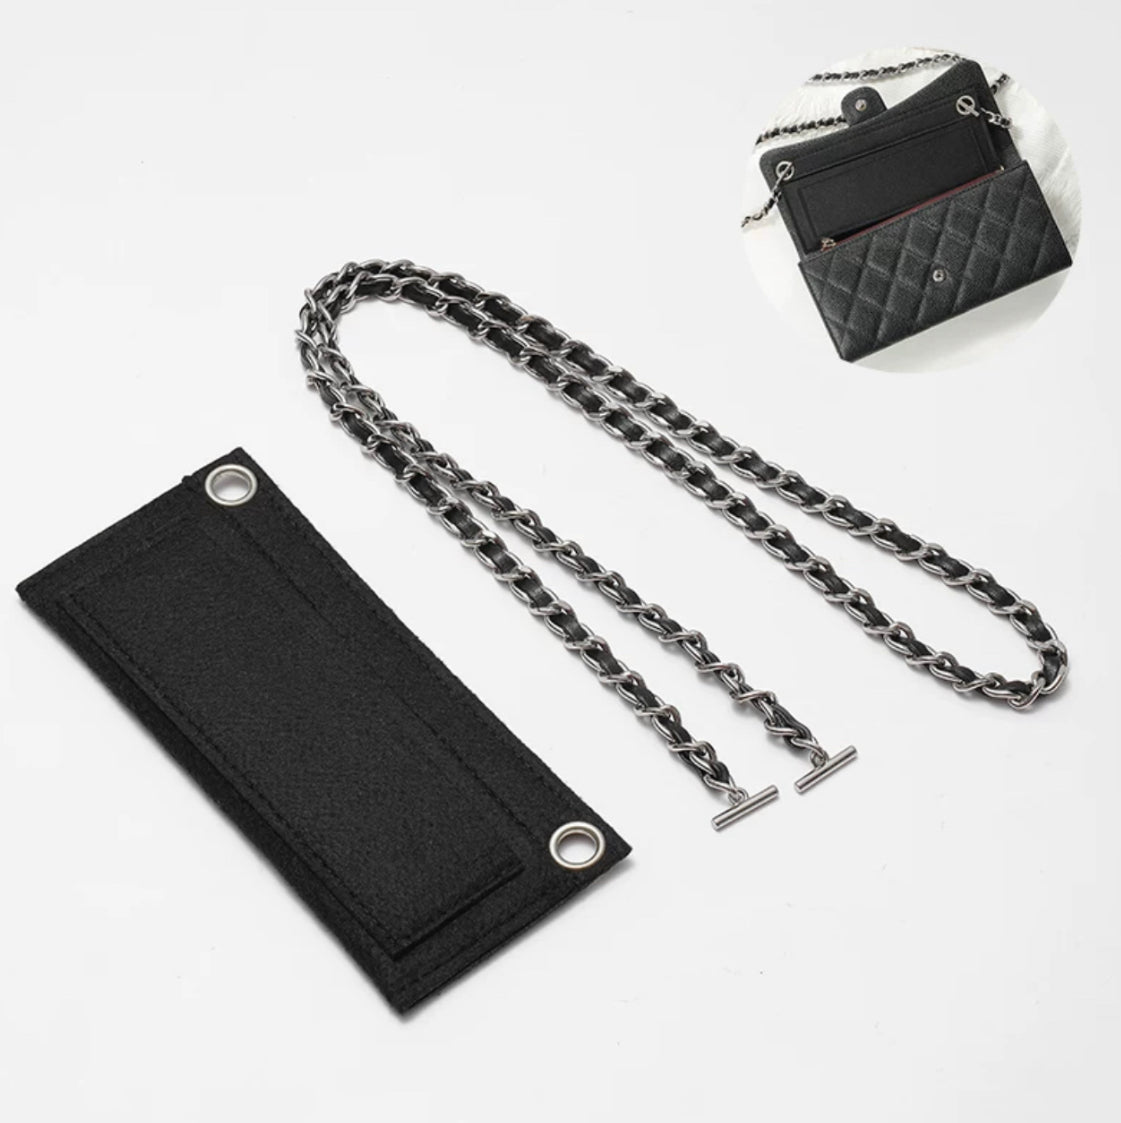 chanel long wallet on chain